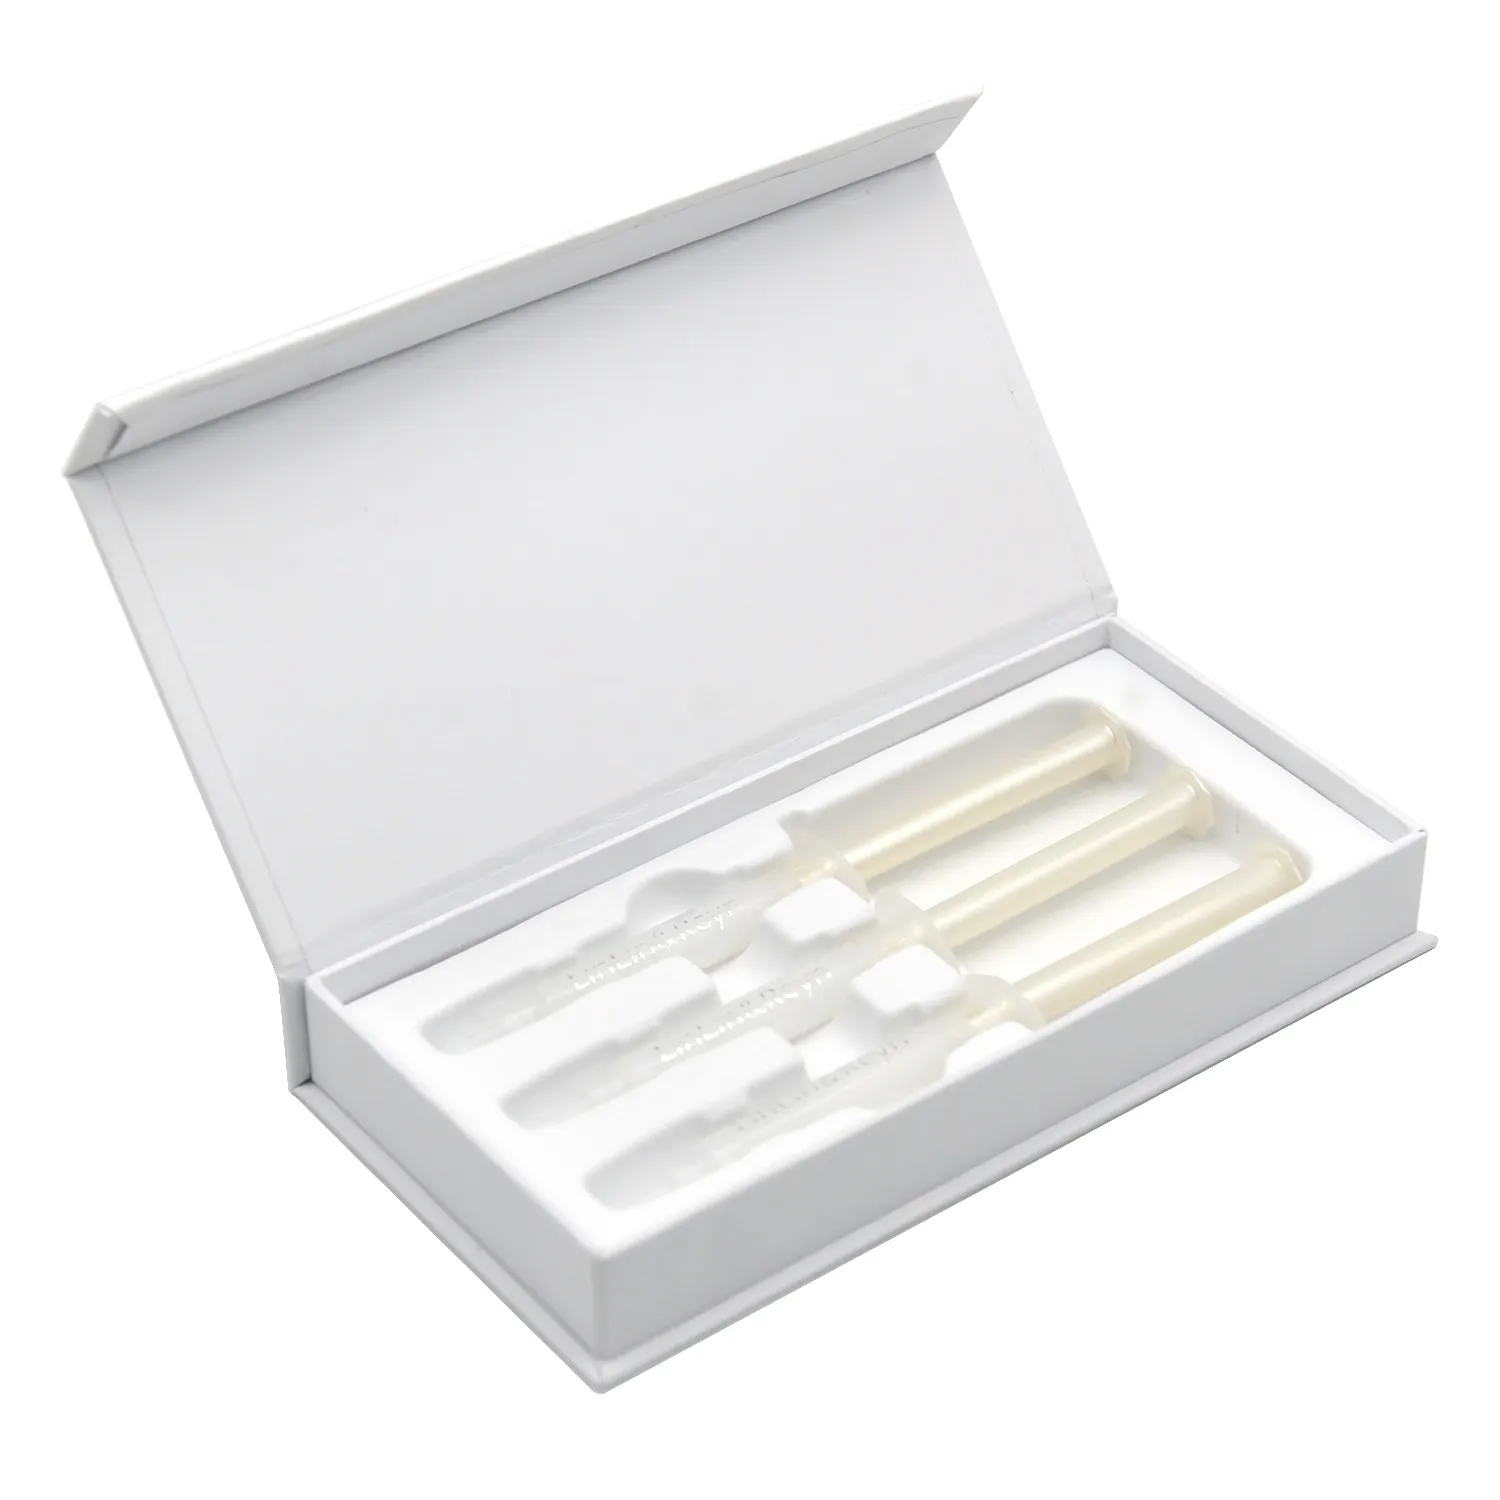 Professional gift box 44% carbamide peroxide box 5ml newest gel home t bleaching teeth whitening syringe refill